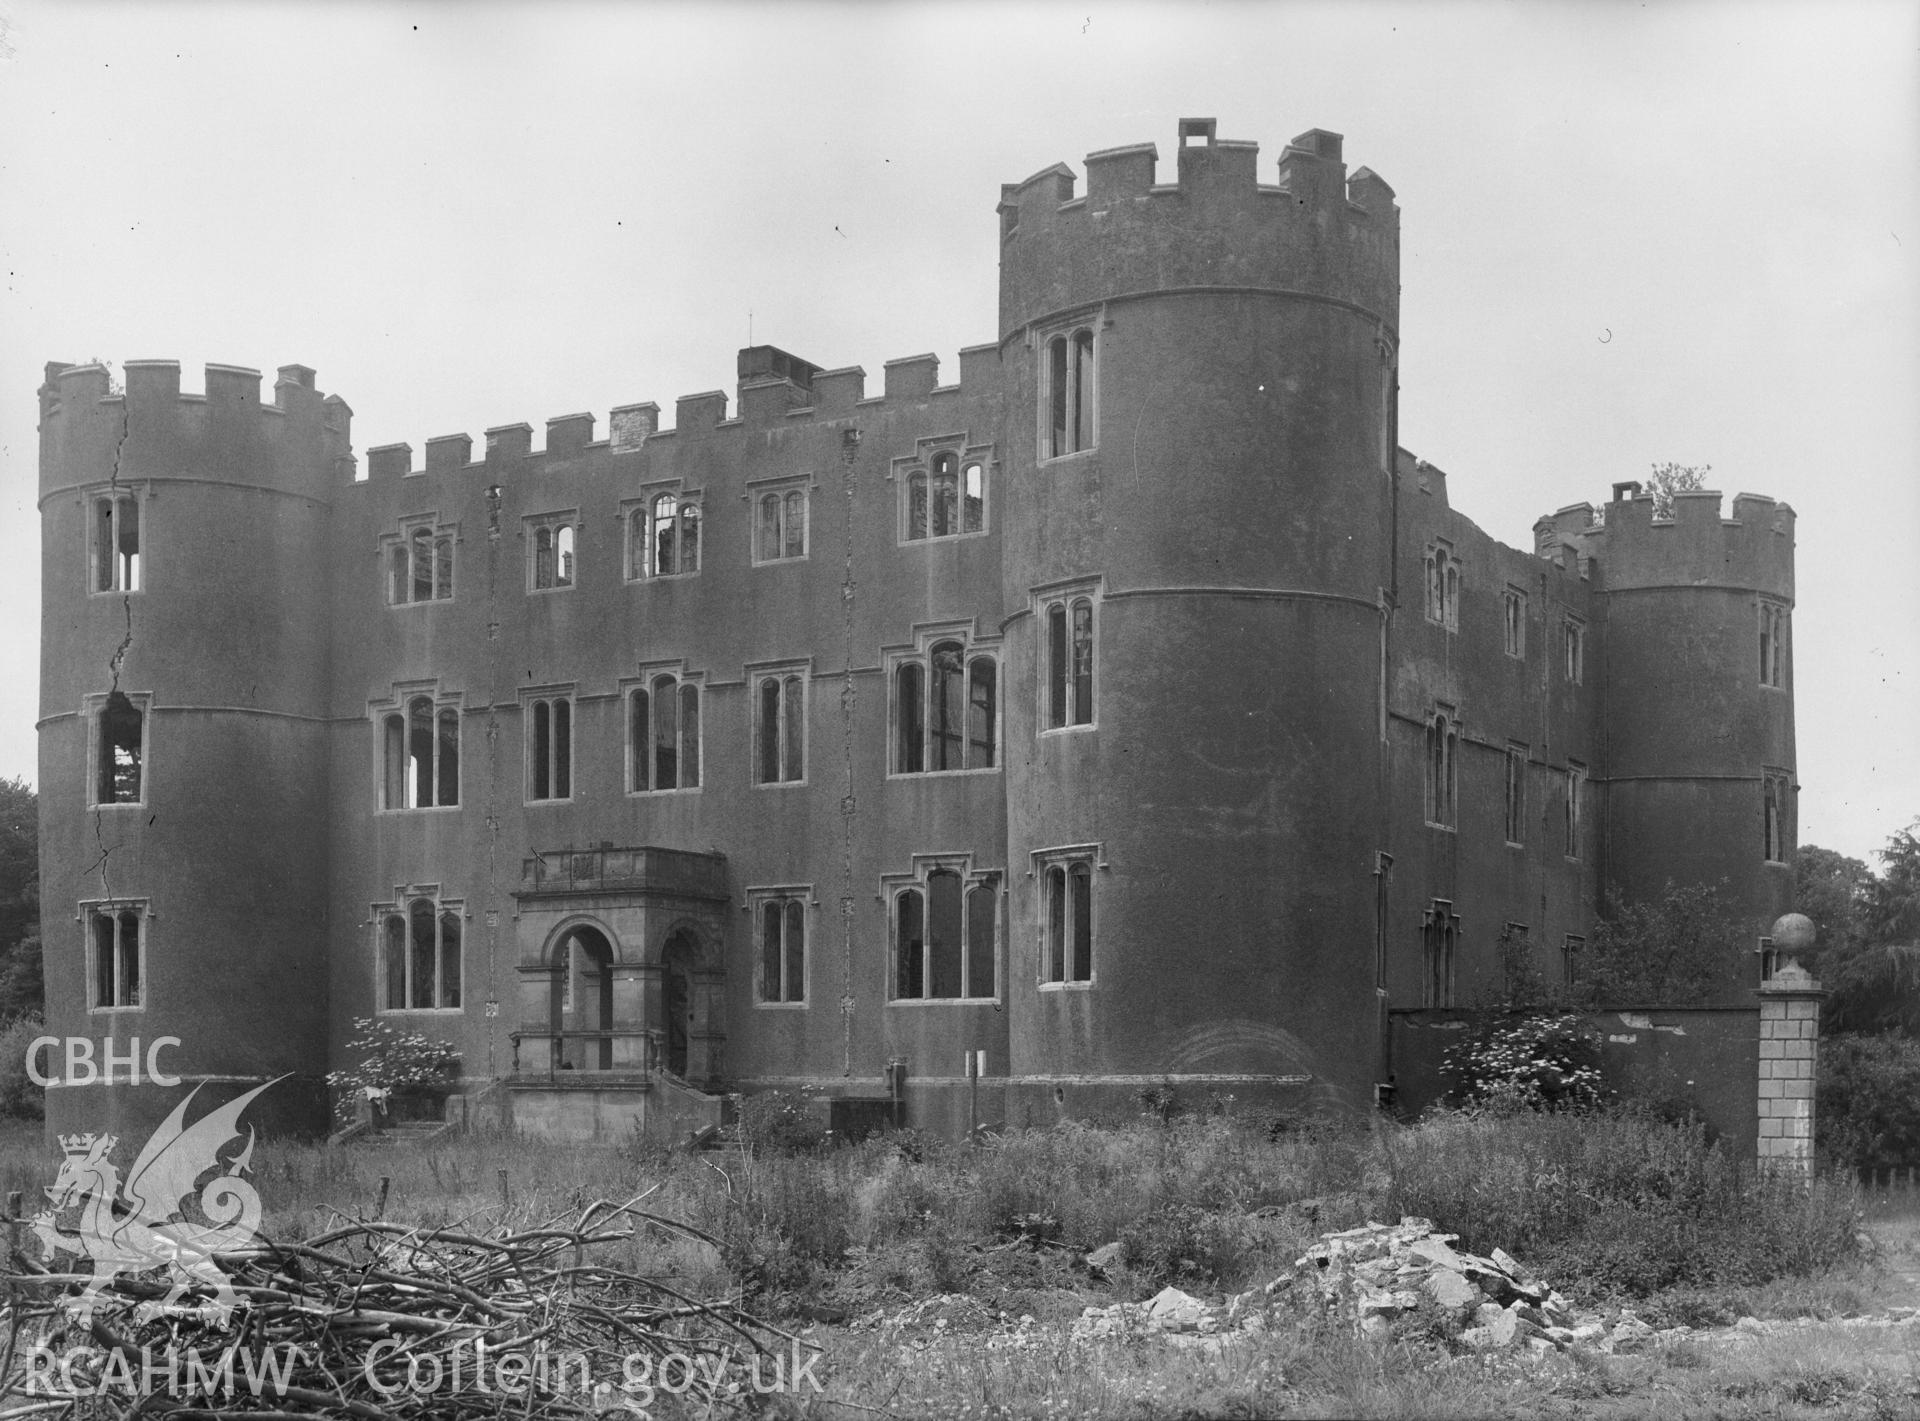 View of the east front door of Ruperra Castle from the north east, taken in 1962.